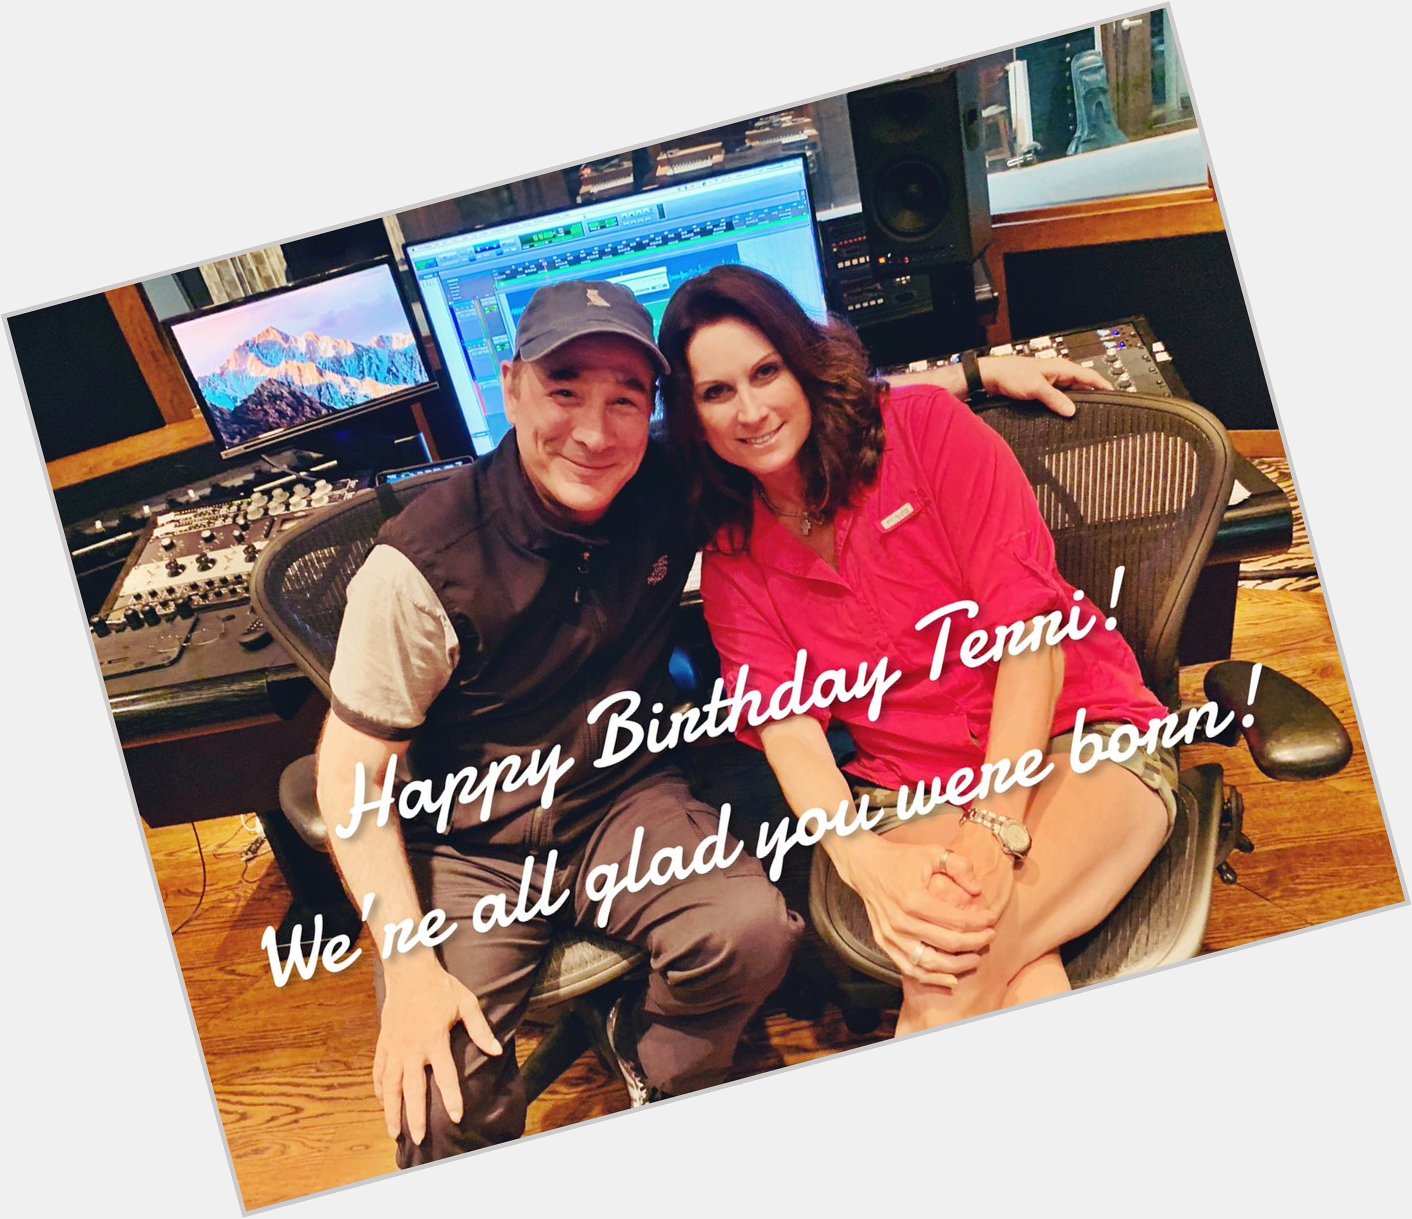 Wishing a very happy birthday to our pal, Terri Clark! 